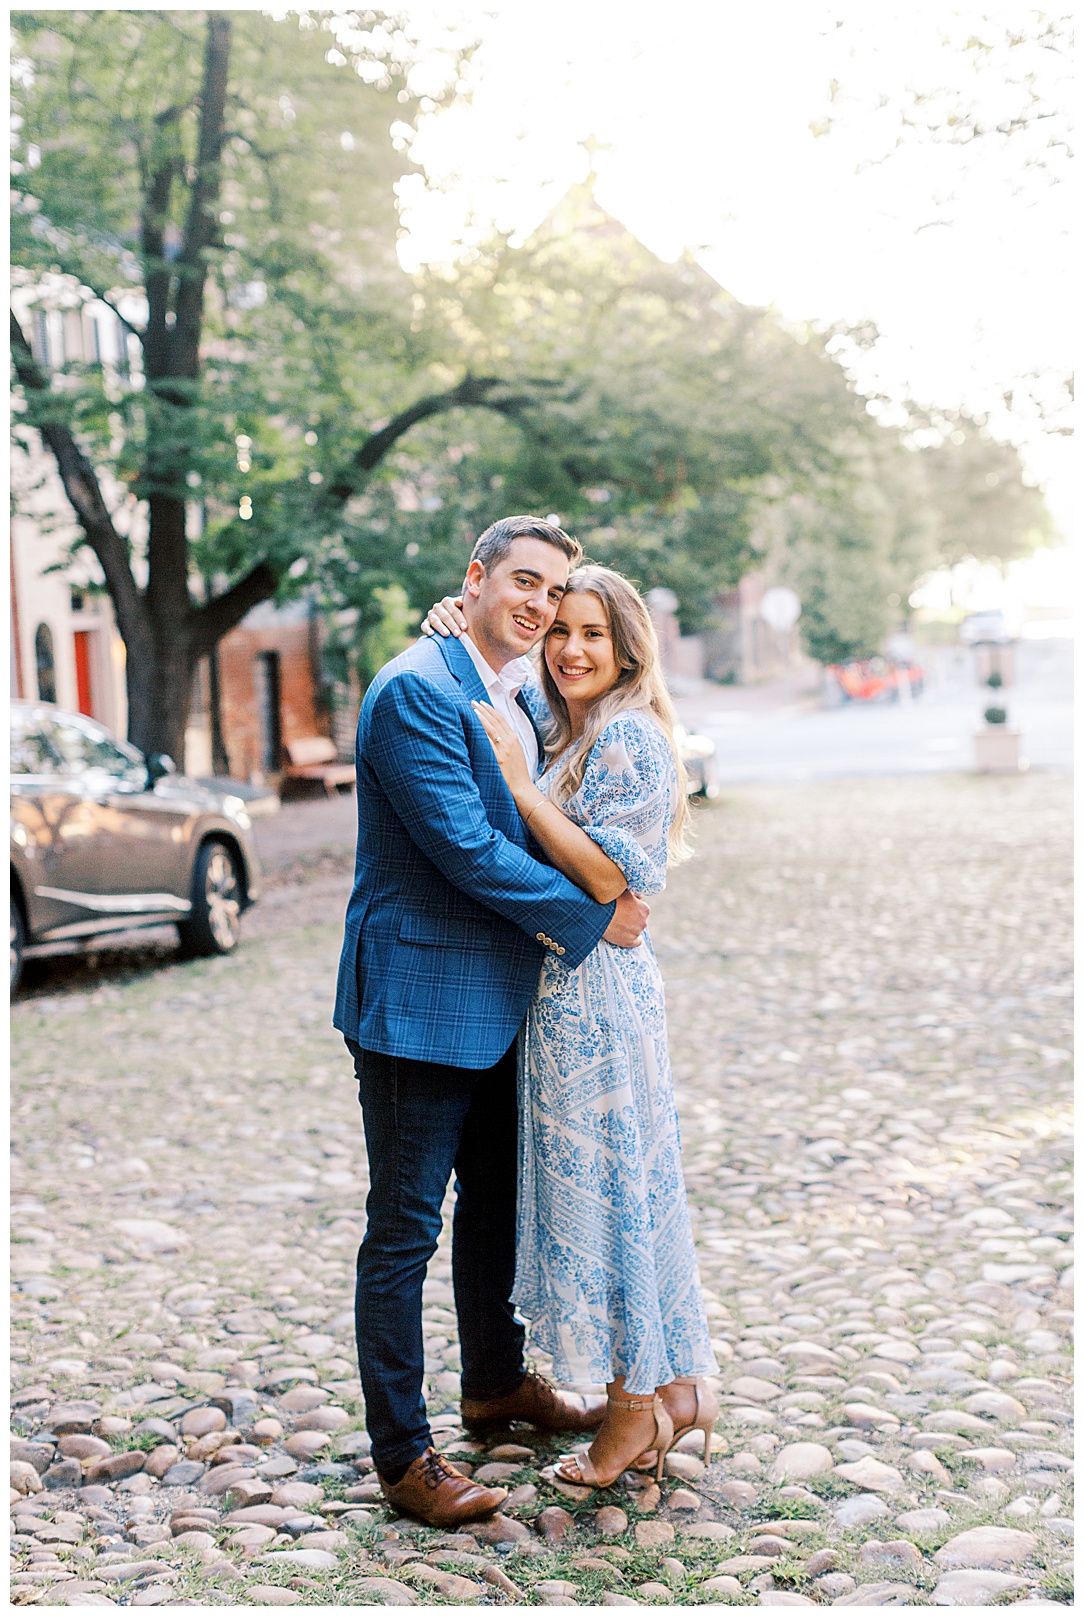 Old Town Alexandria Cobblestone Streets - Sunrise Engagement Session near DC